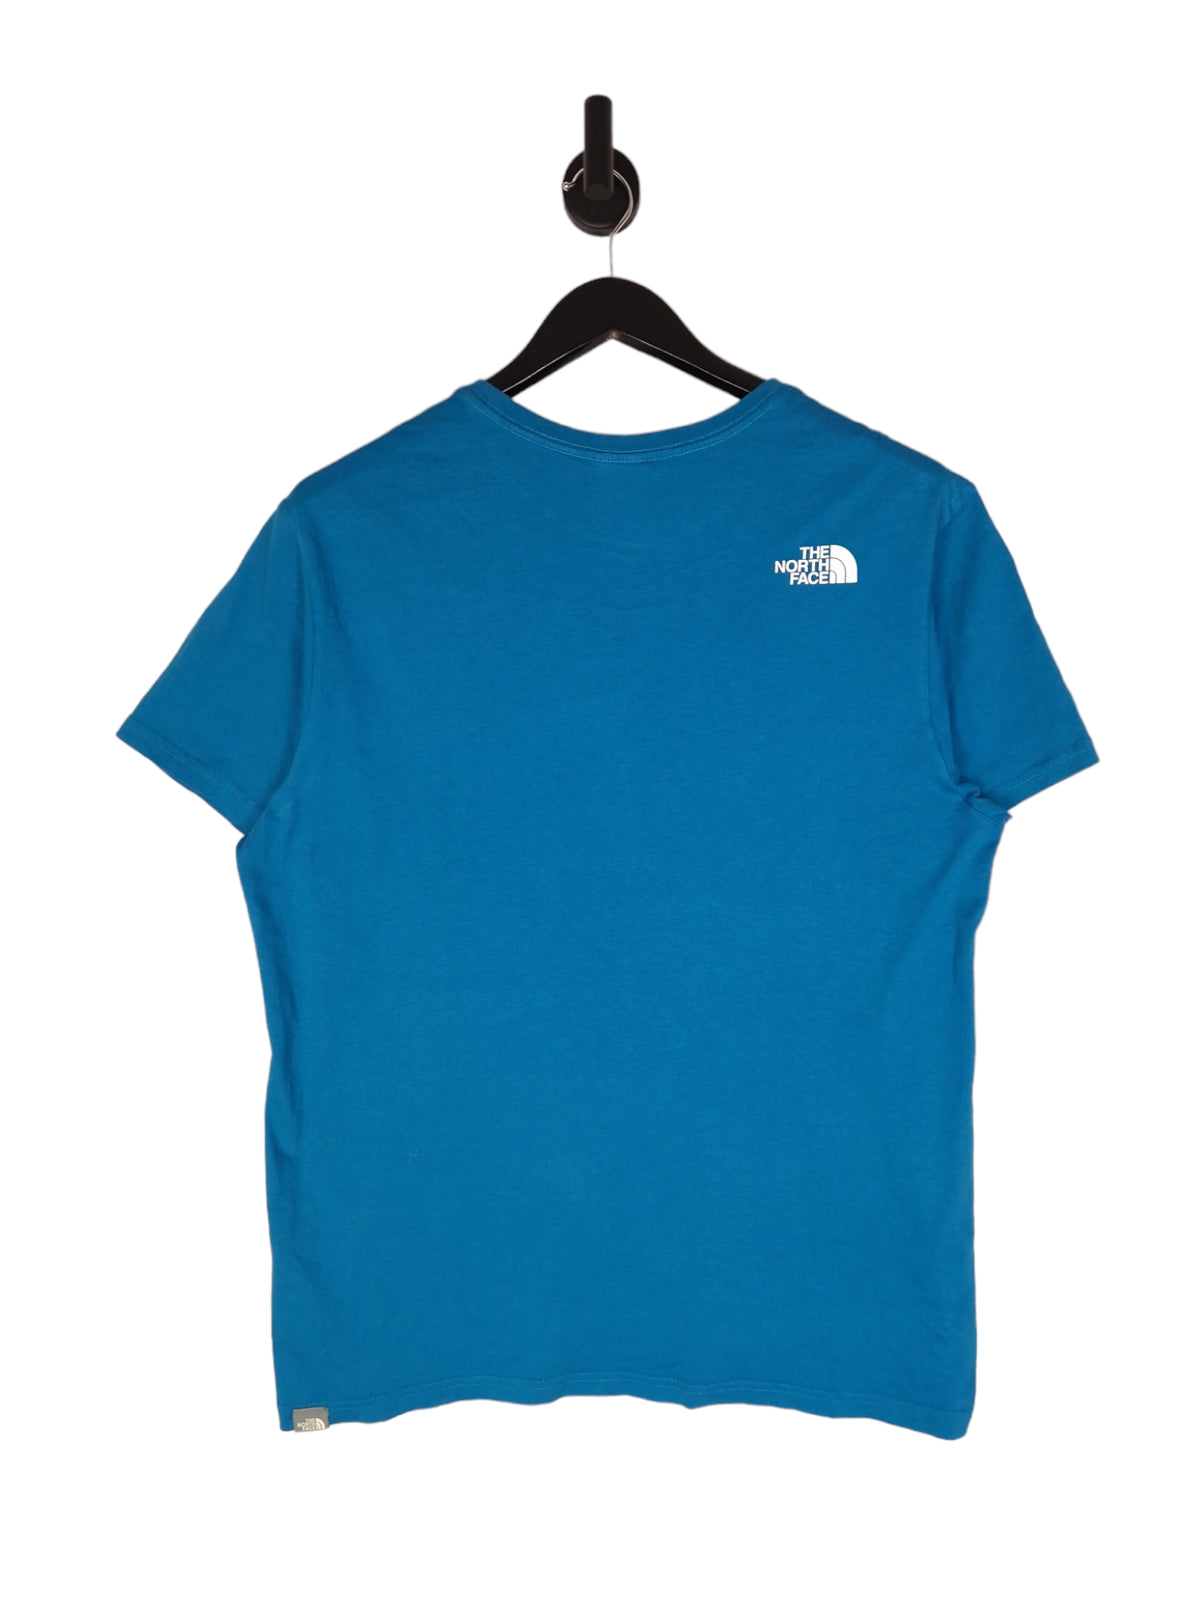 The North Face Short Sleeve T-Shirt - Size Large